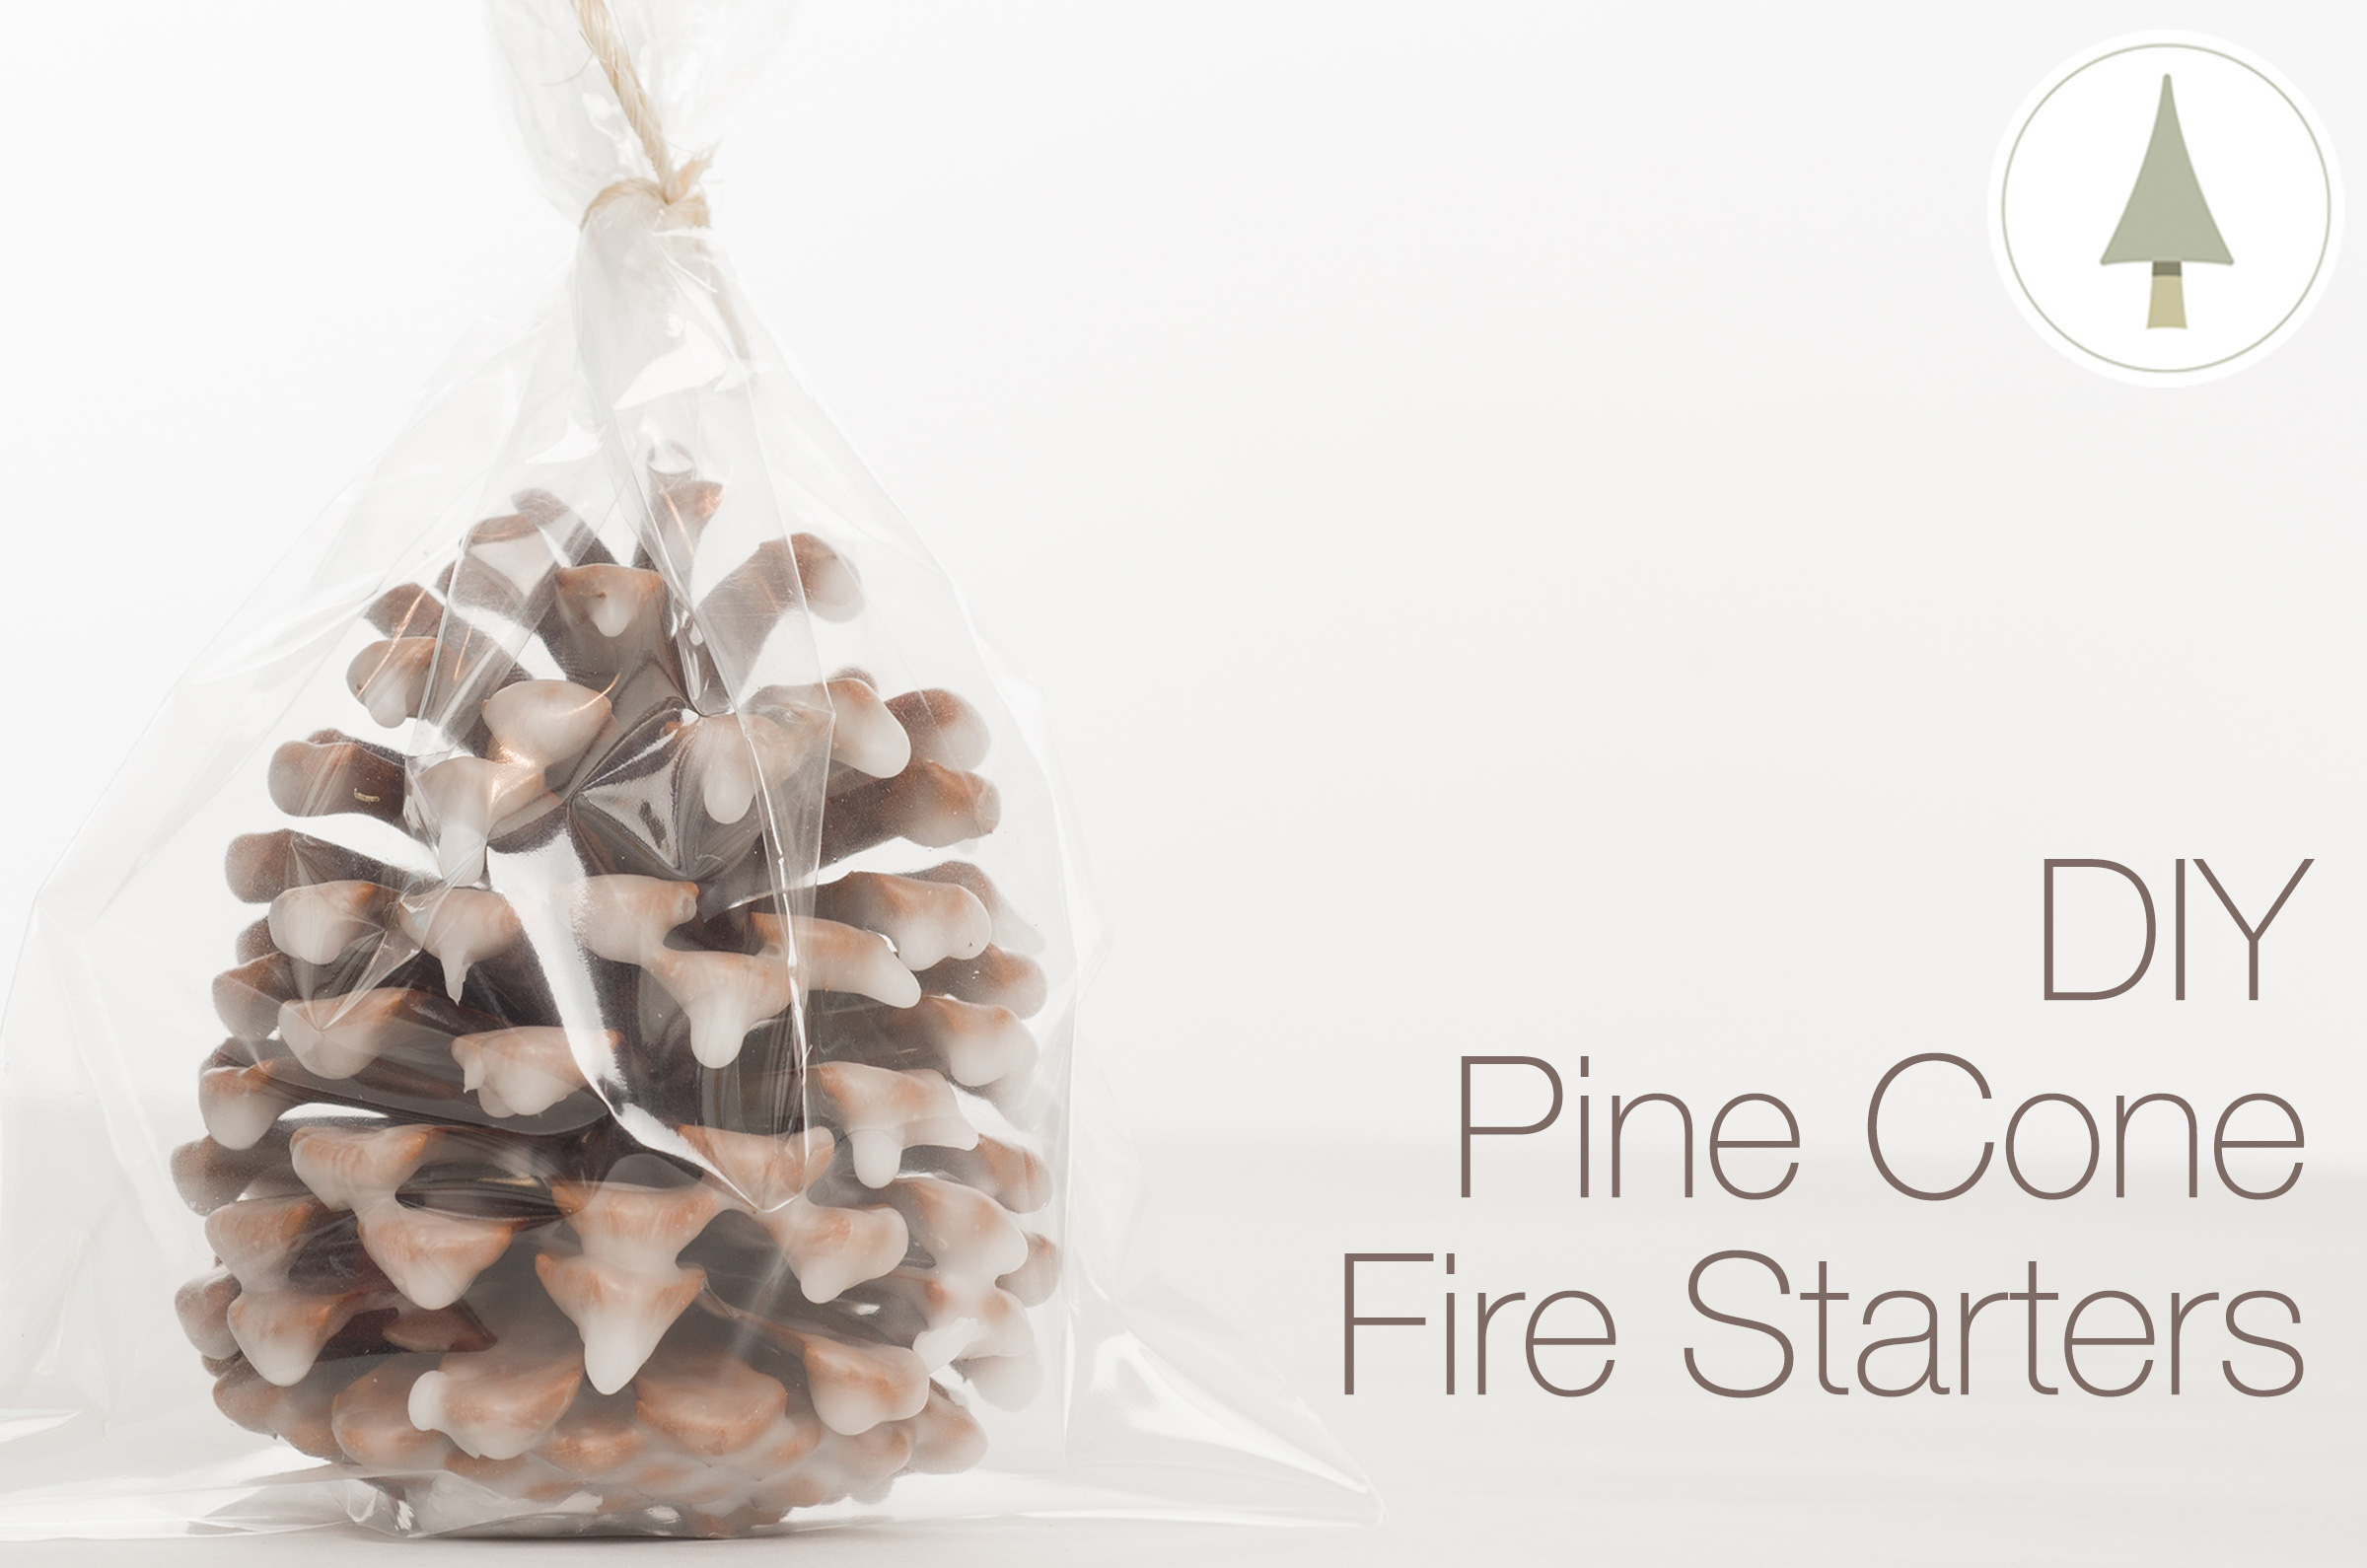 learn how to make fire starters from pine cones